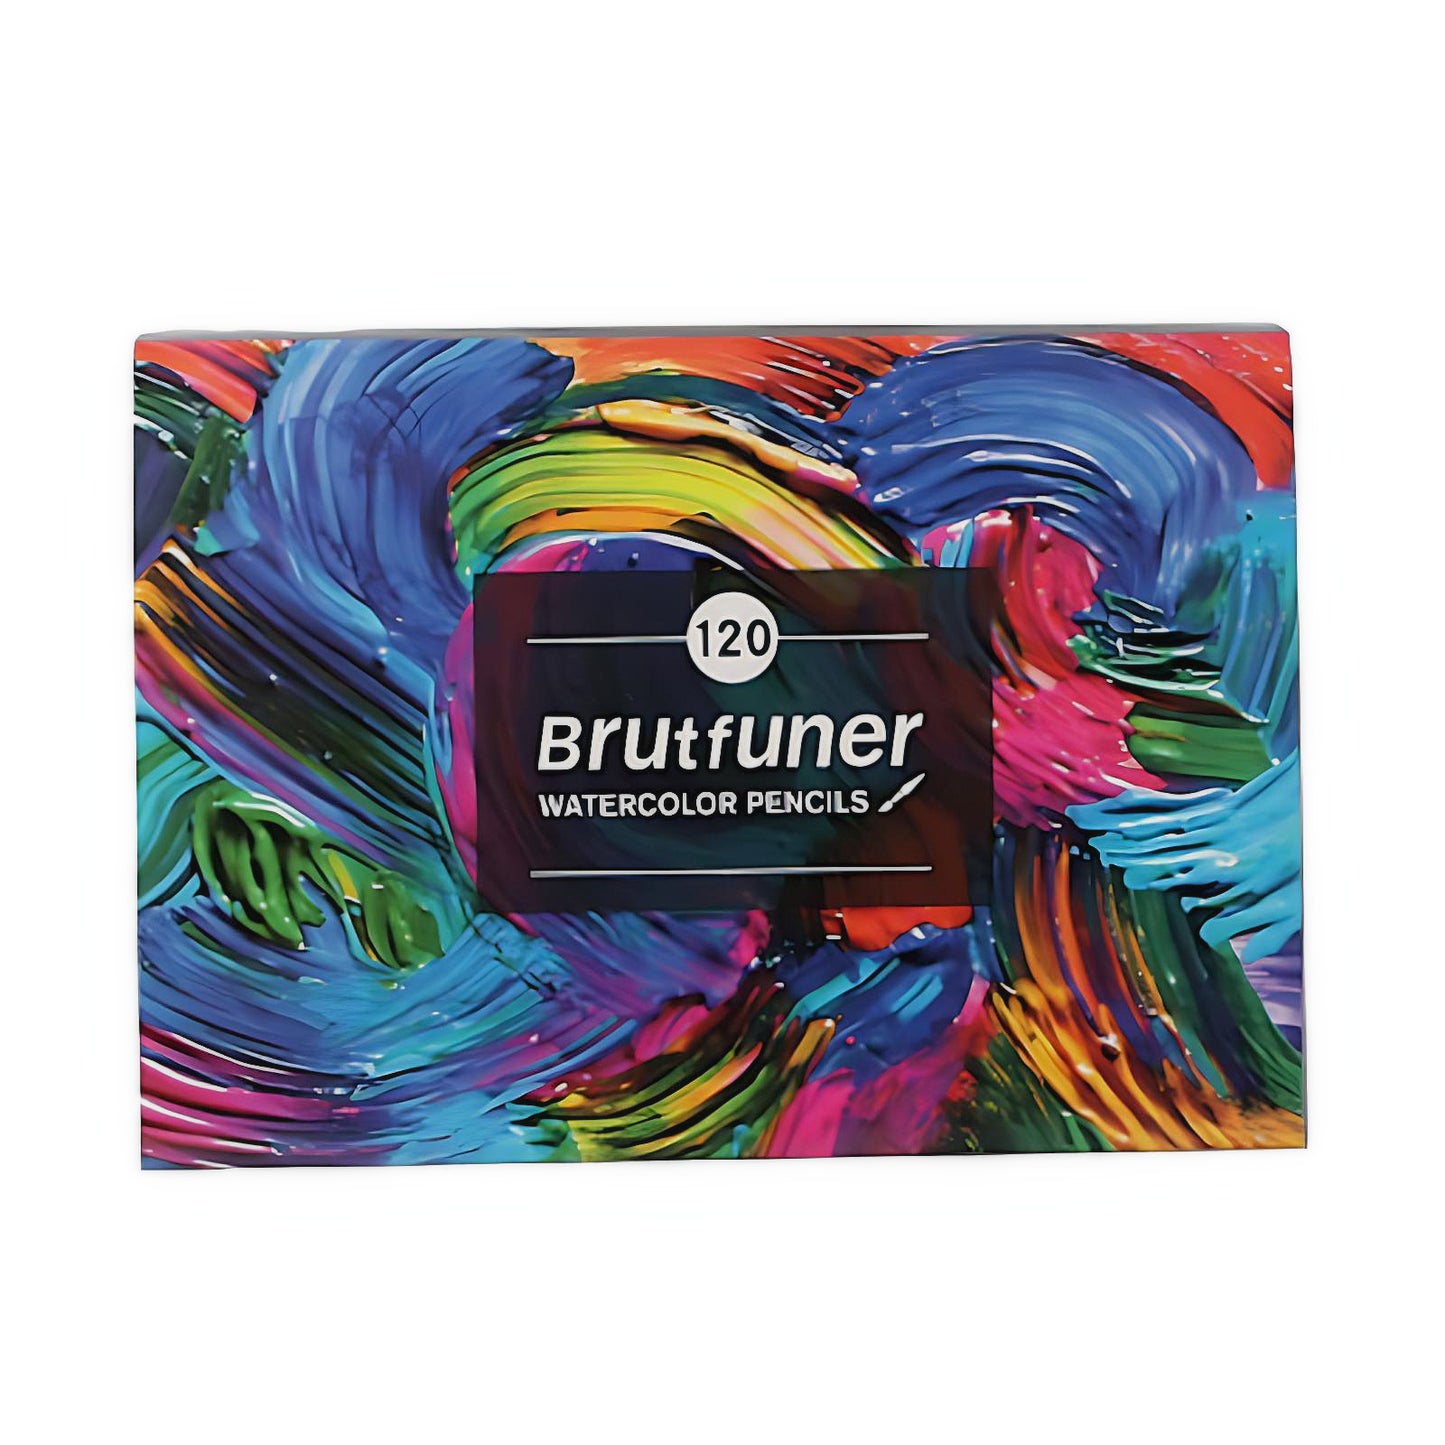 a 120 set of Brutfuner watercolor pencils on a white background